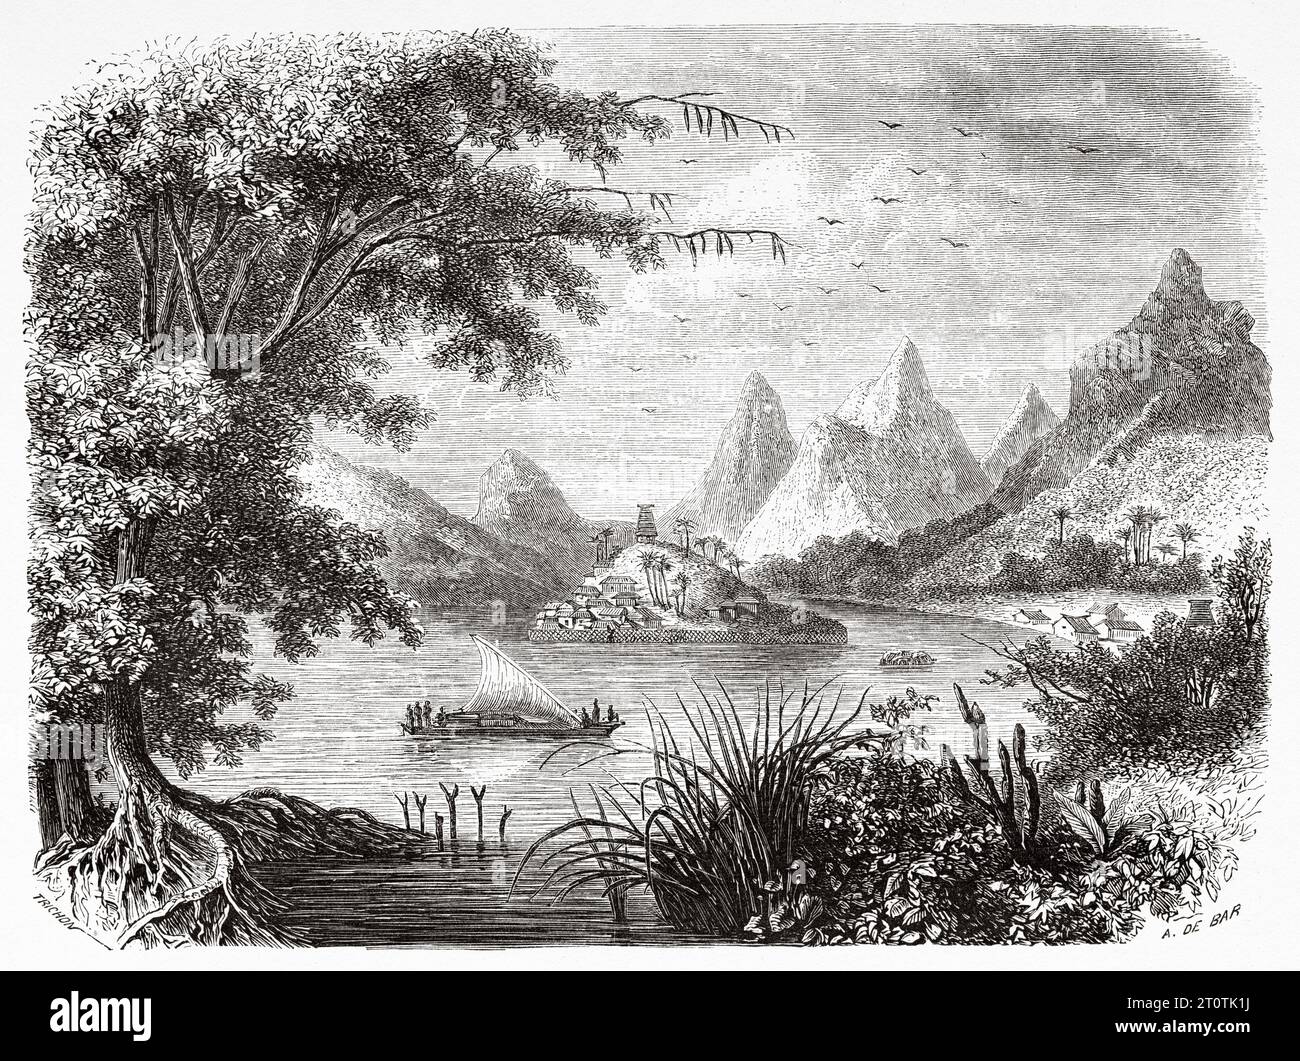 Vanua Levu Island, Fiji islands. Melanesia, Oceania in the southwestern Pacific Ocean. Voyage to the Great Viti, great equinoctial ocean by John Denis Macdonald 1855. Old 19th century engraving from Le Tour du Monde 1860 Stock Photo